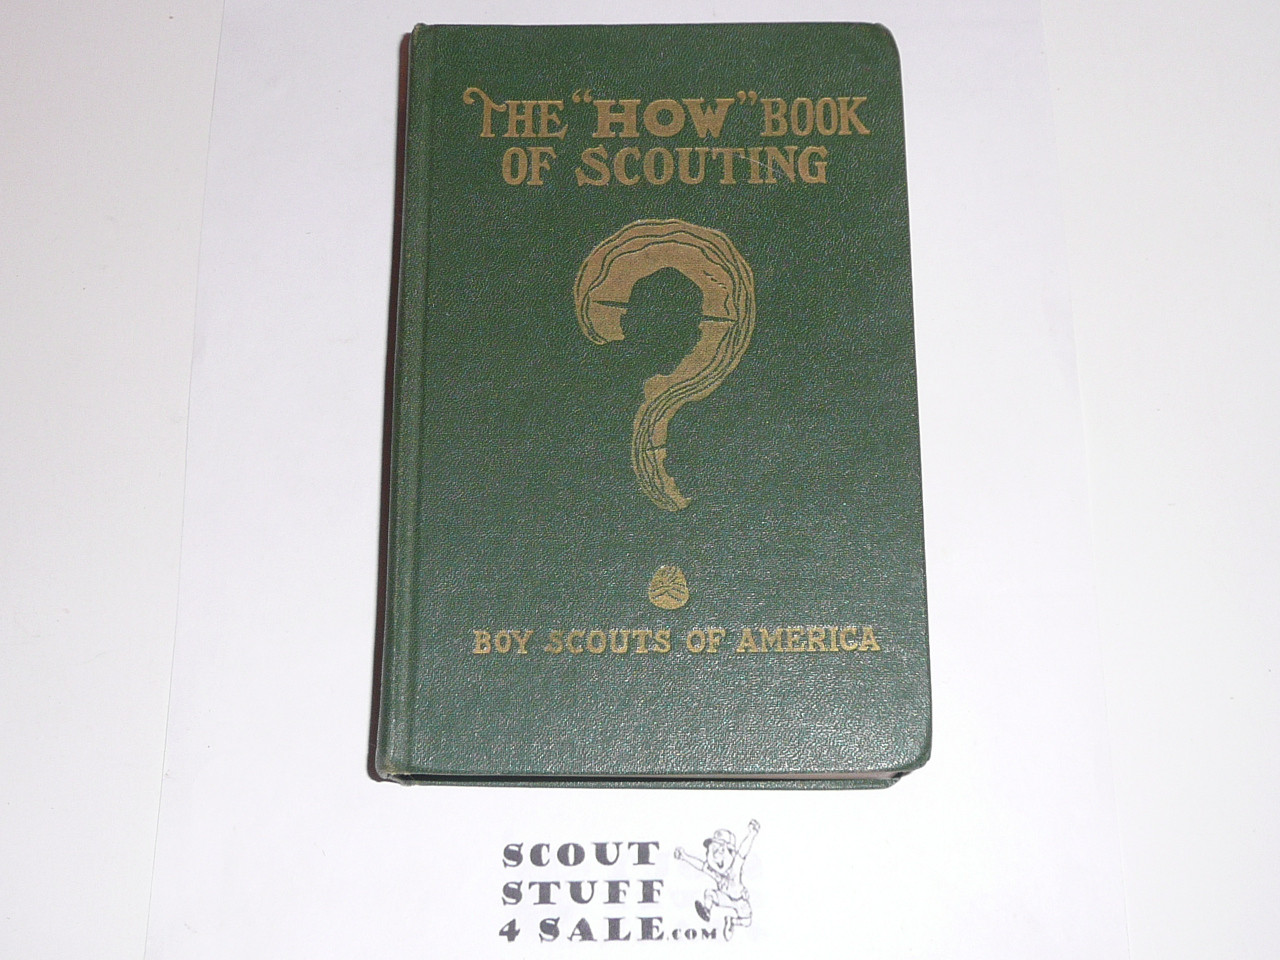 1942 The How Book of Scouting, Boy Scout, 7-42 Printing